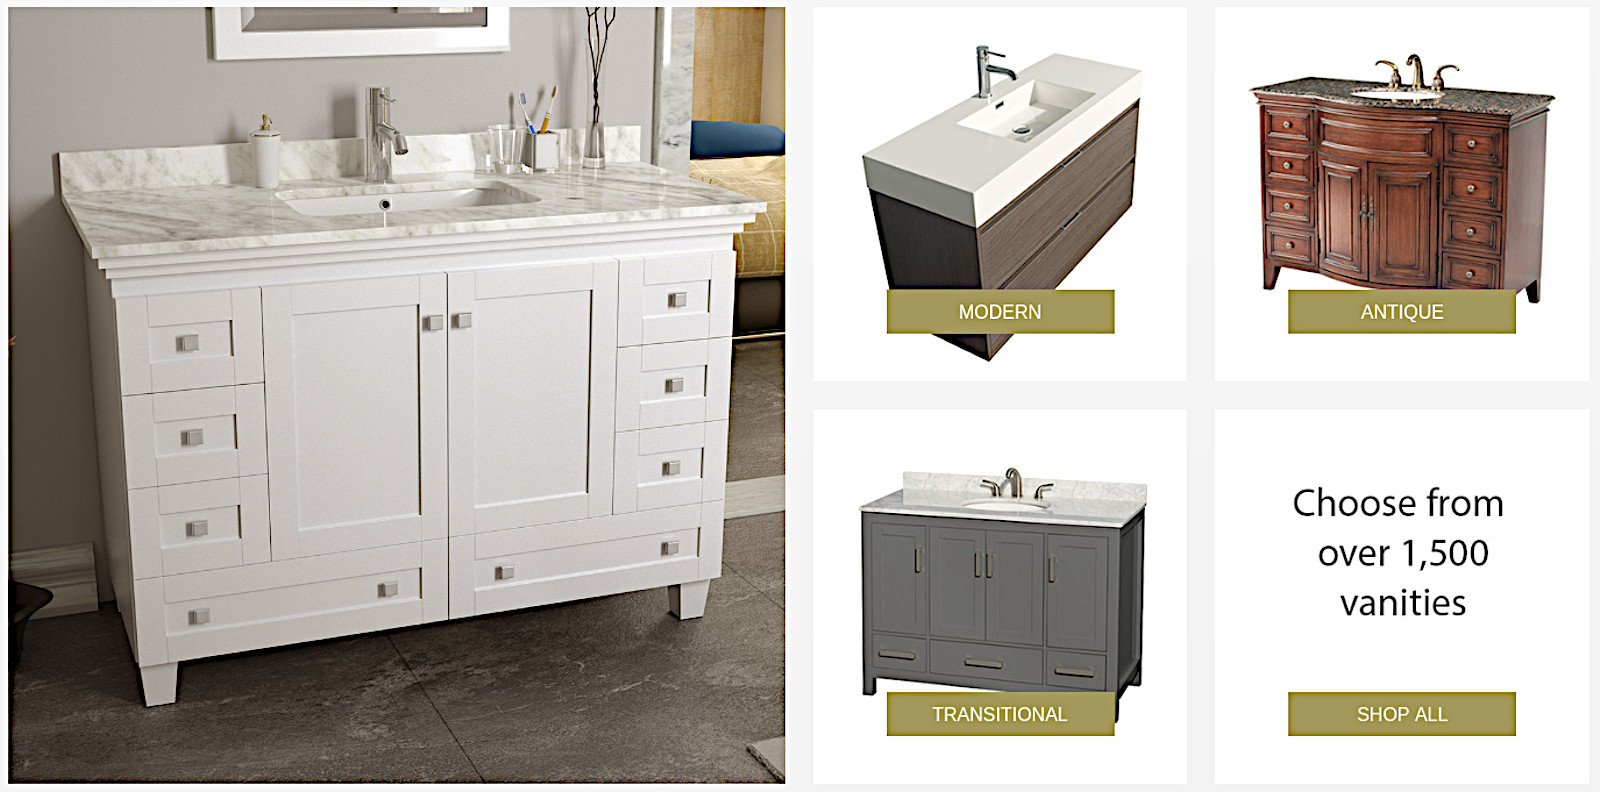 Uncostly modern antique transitional vanities